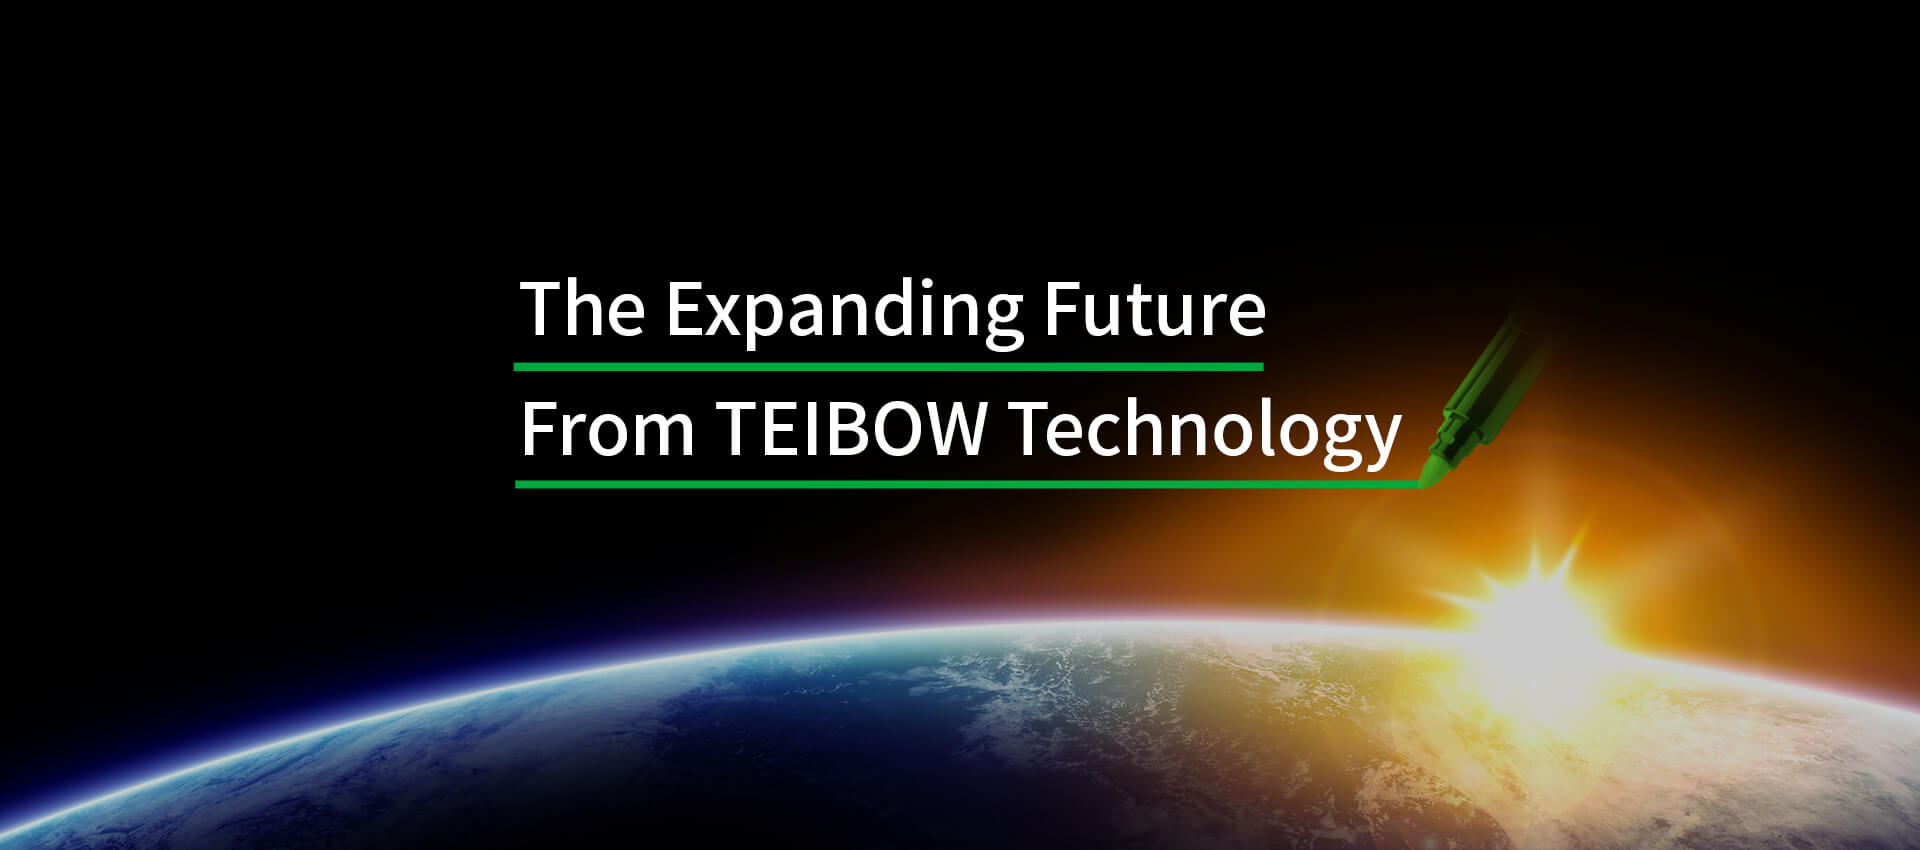 The Expanding Future From TEIBOW Technology